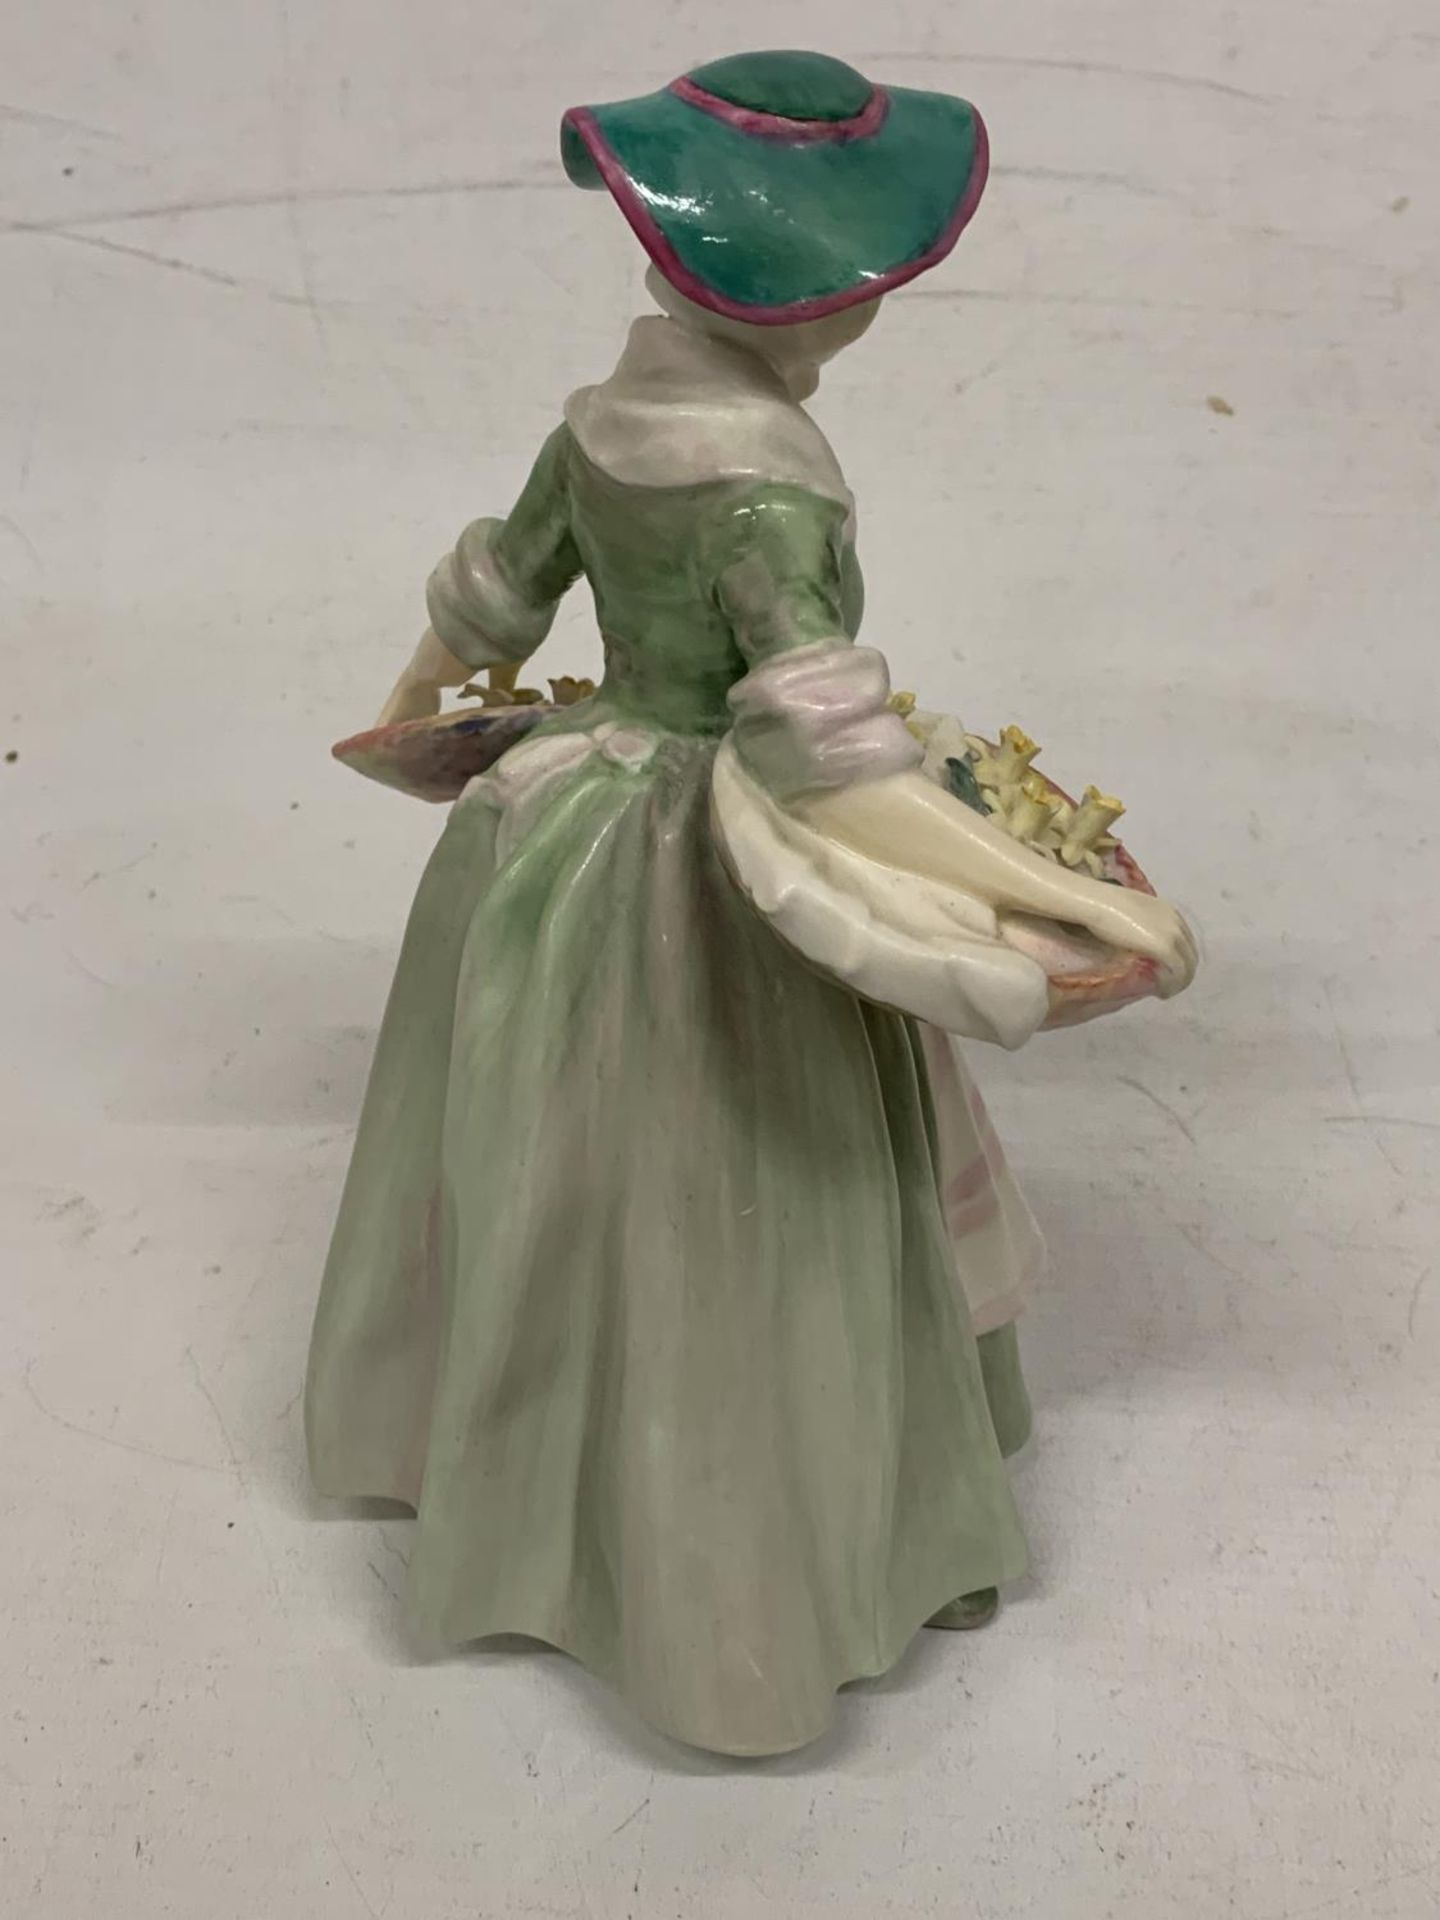 A ROYAL DOULTON FIGURINE "DAFFY DOWN DILLY" HN 1712 - Image 2 of 4